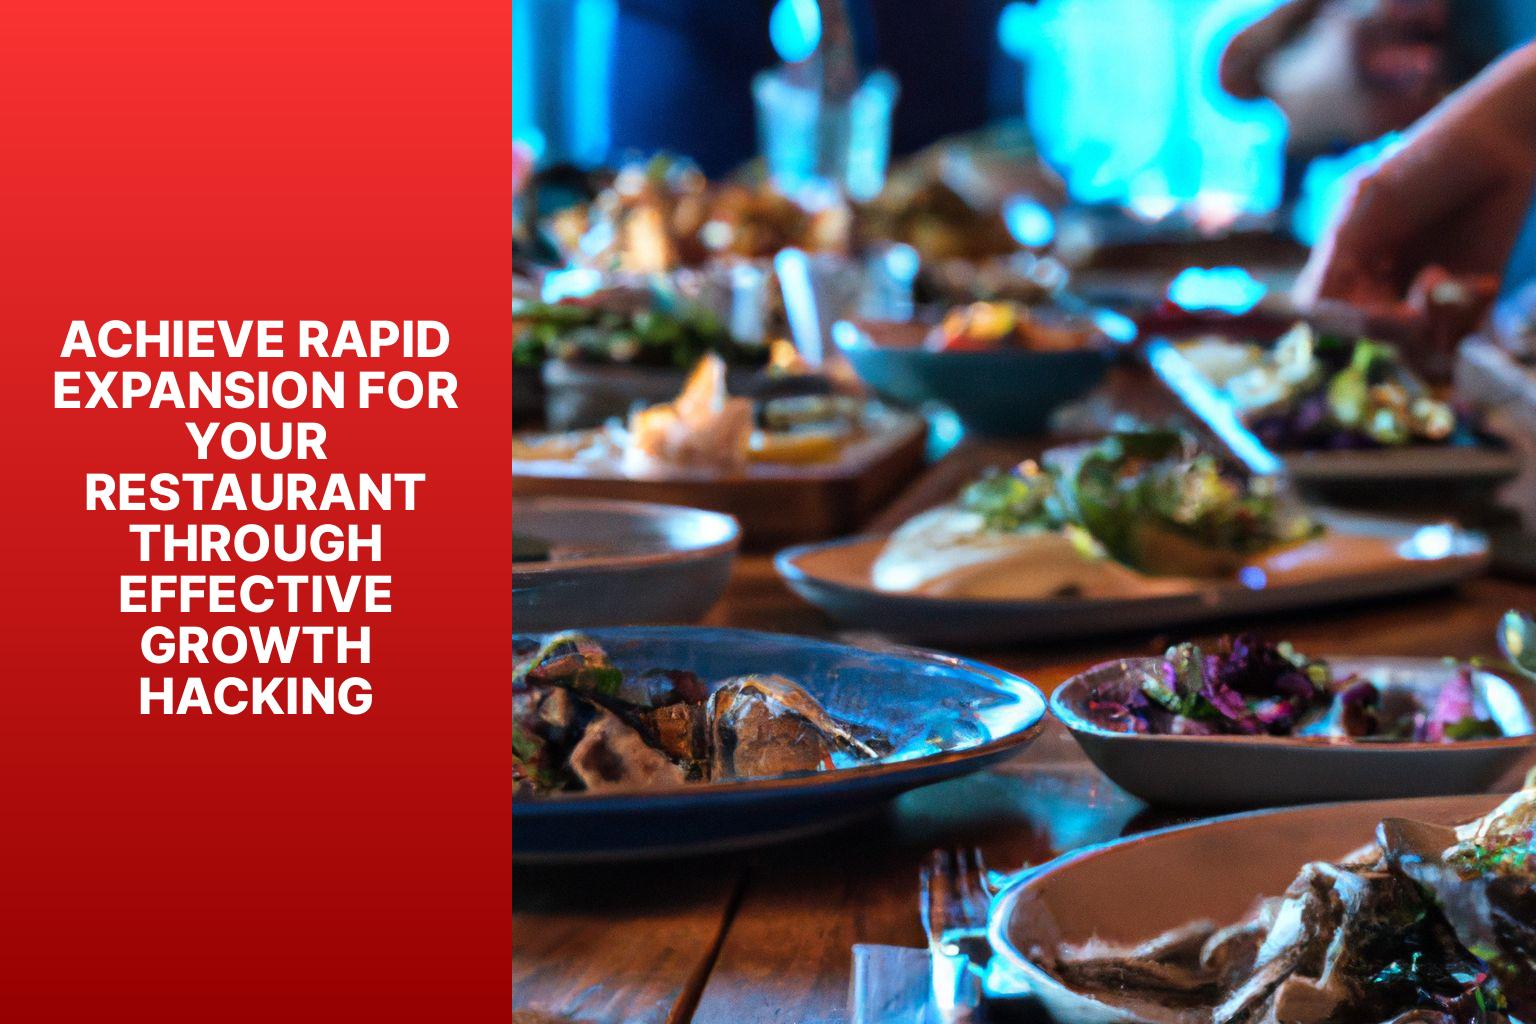 Achieve Rapid Expansion for Your Restaurant through Effective Growth Hacking